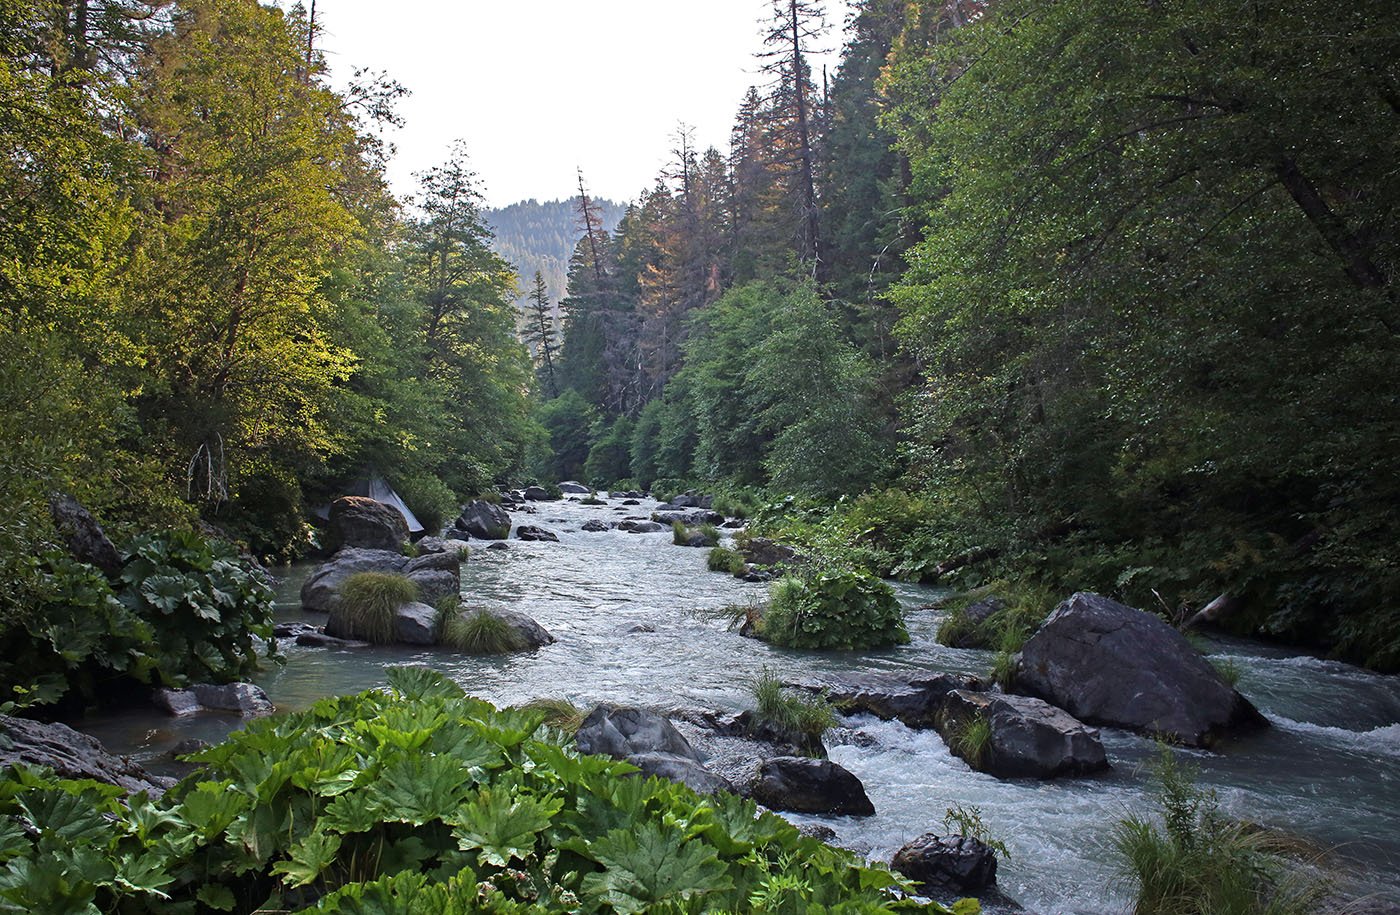  Shasta-Trinity National Forest, CA — The McCloud River offers a potential habitat with pristine conditions and cold water for Chinook salmon eggs and juvenile fish.  July 11, 2022. Tom Levy/The Spiritual Edge 